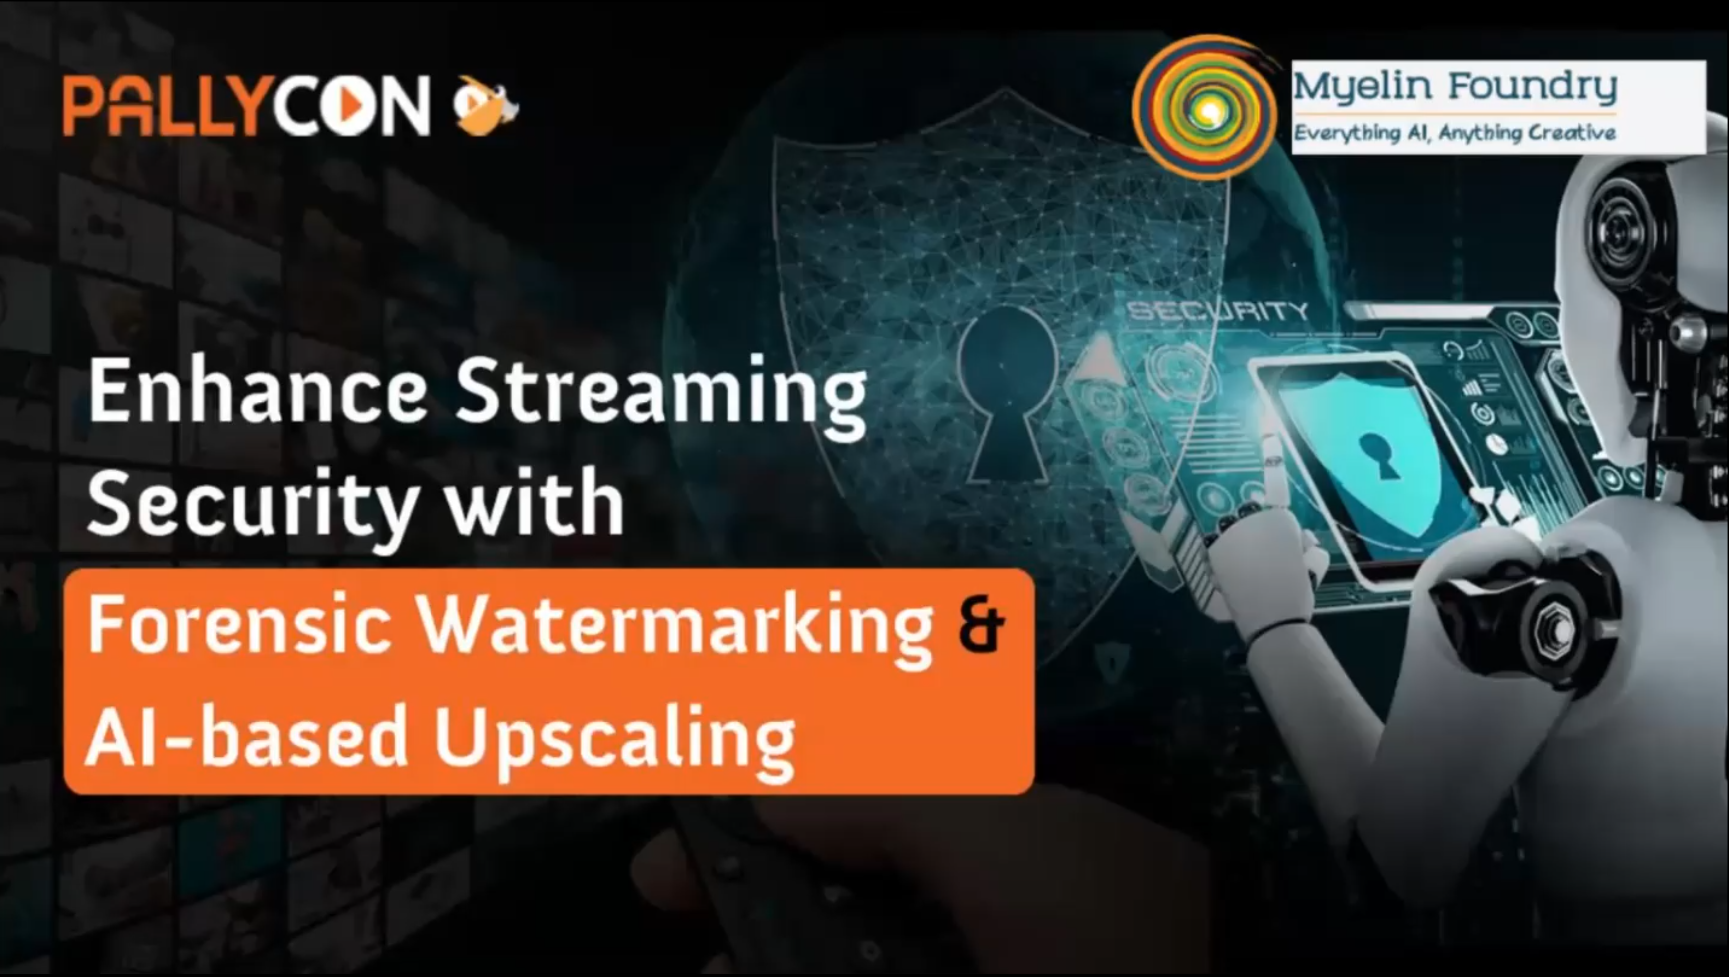 Enhance Streaming with Forensic Watermarking & AI-based Upscaling